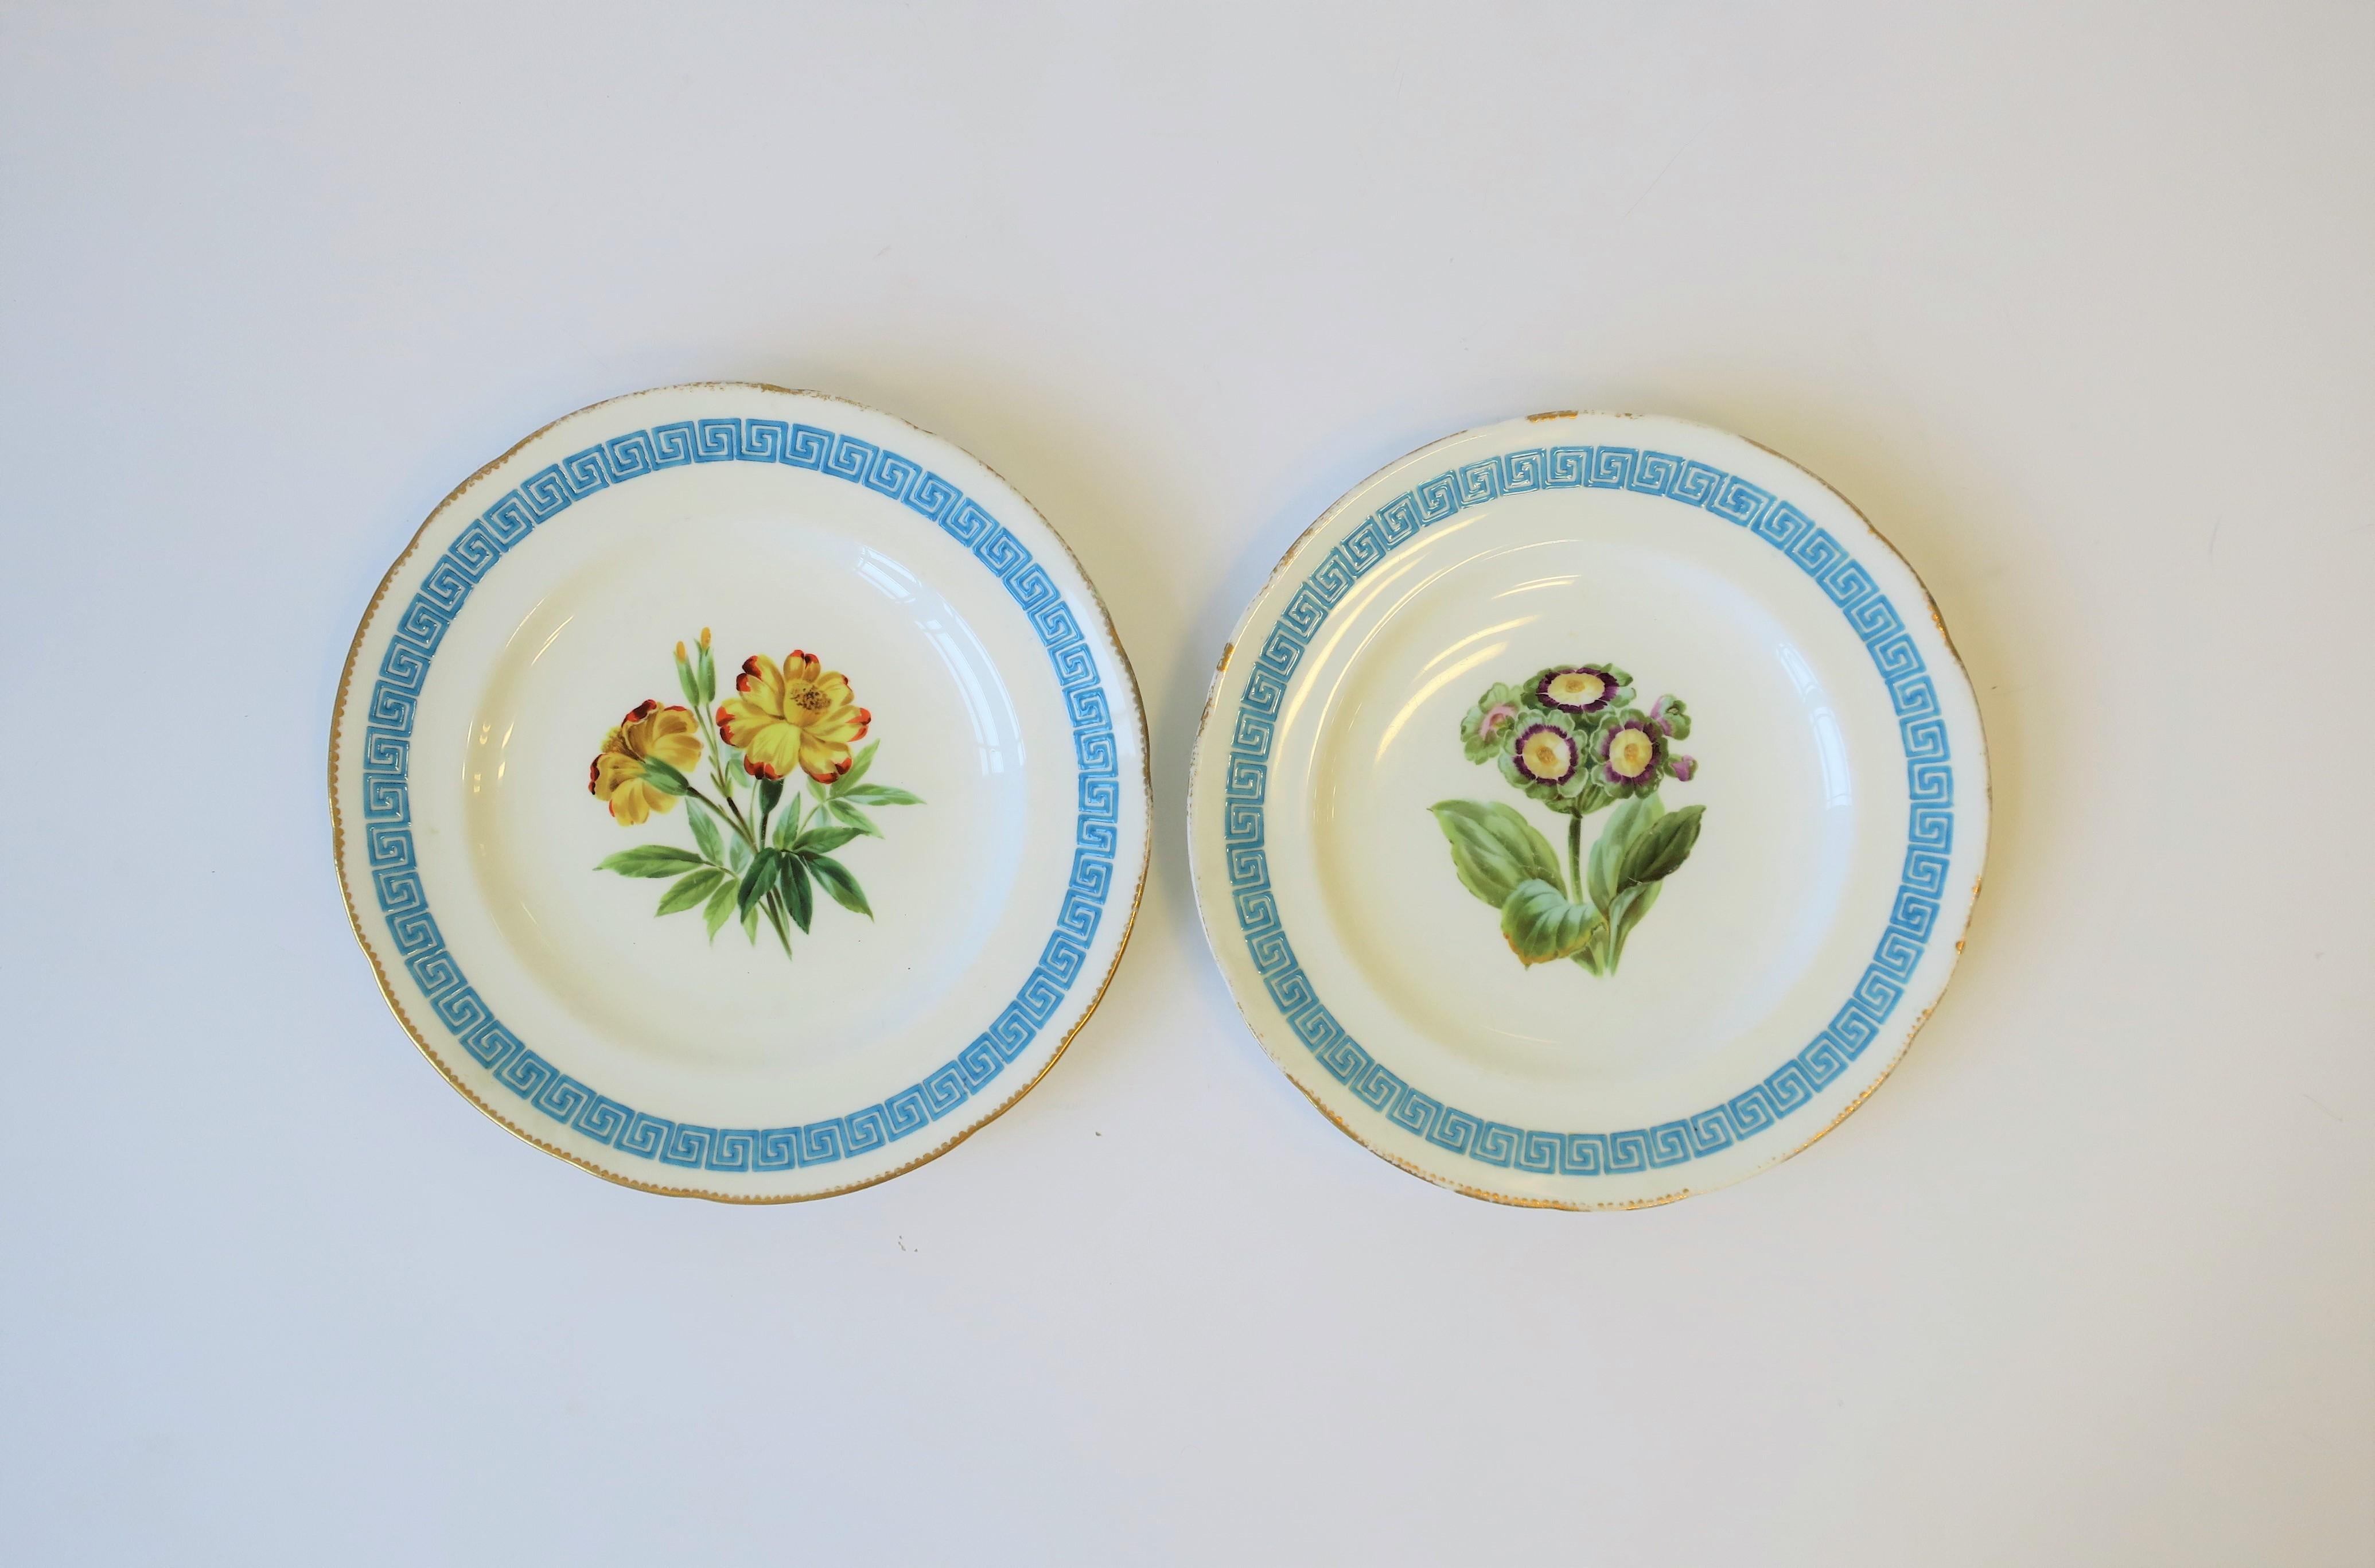 A beautiful set of two antique English Minton hand painted porcelain plates with a floral and Greek key design, finished with a gold trim, circa early-20th century, England. Greek-key design around plates edge is slightly raised. Colors include: